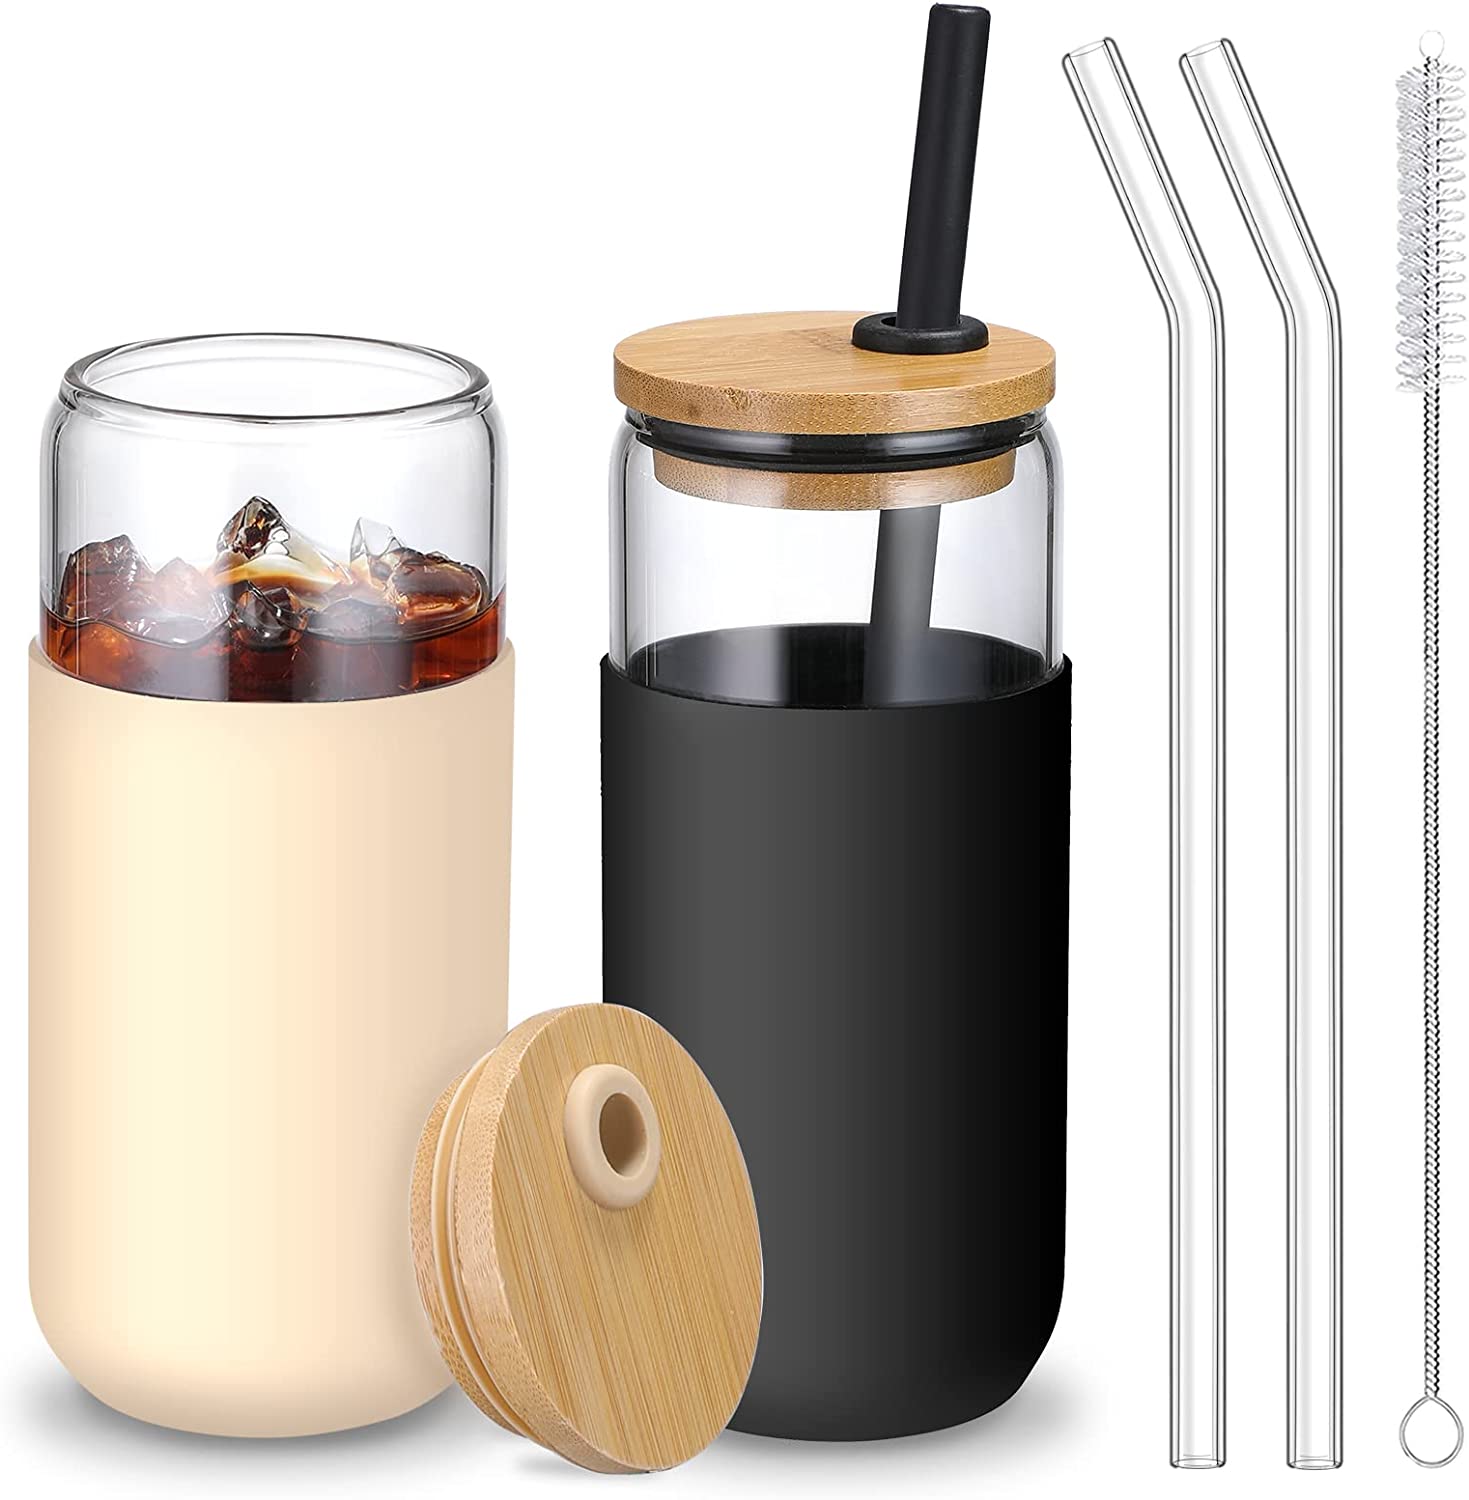 Wholesale Clear Glass Coffee Cup Drinking Glass Tumbler With Straw And Lid  - Buy Glass Tumbler With Straw And Lid,Glass Coffee Cup,Color Glass Cup  With Straw Pr…